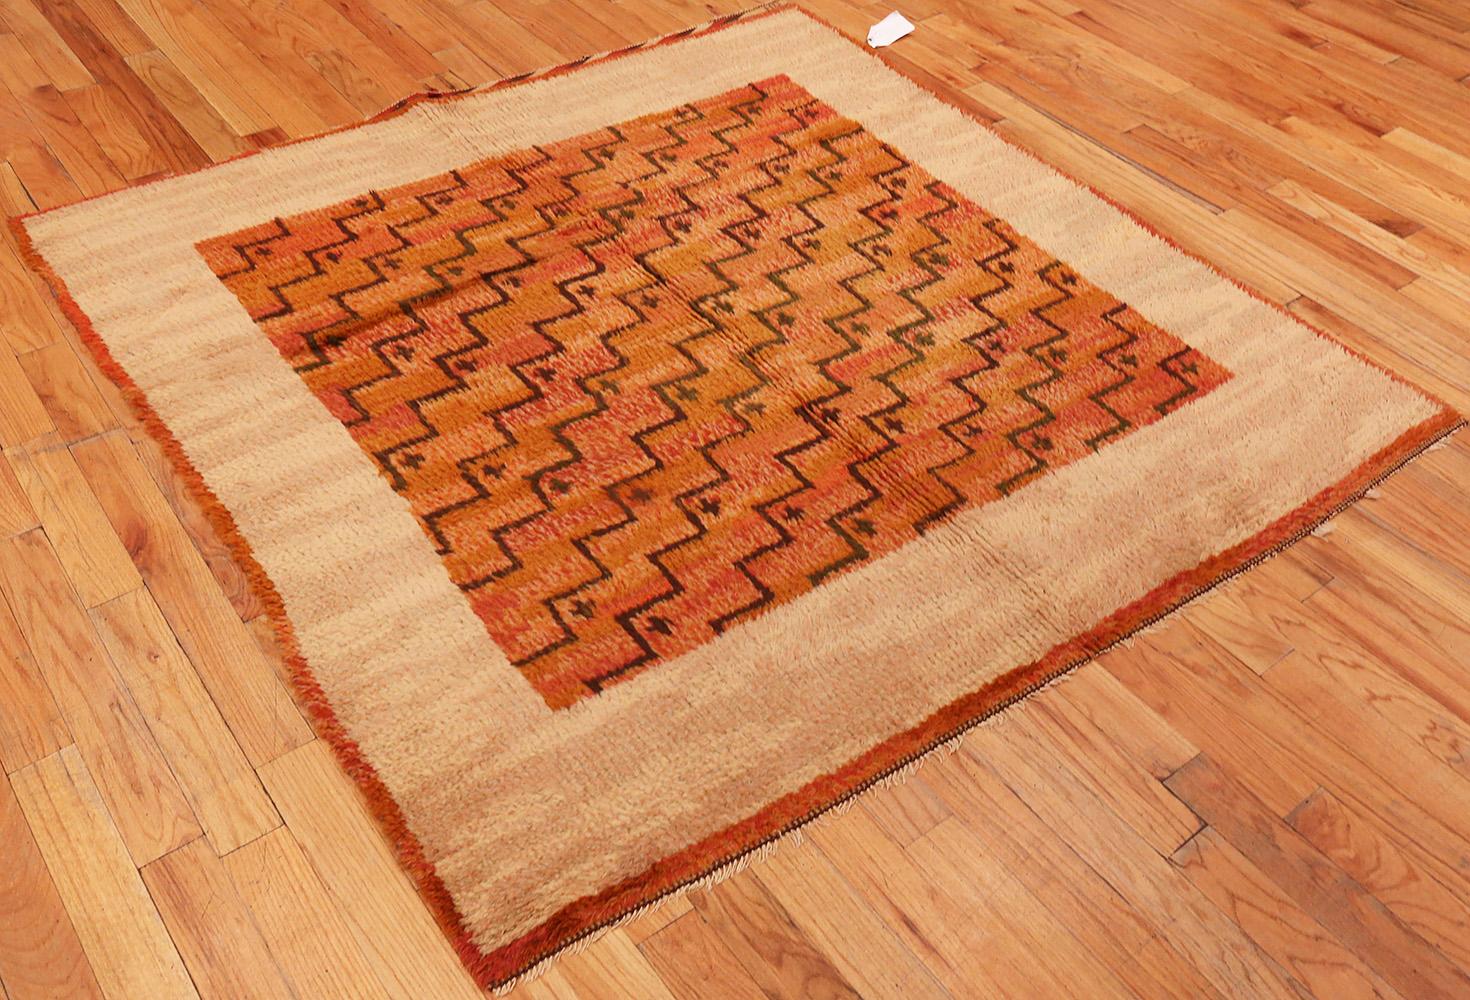 Scandinavian Swedish rug, Origin: Sweden, circa mid-20th century. Size: 5 ft 9 in x 5 ft 11 in (1.75 m x 1.8 m).

This lovely Swedish deco rug has a a stunning stepped geometry on a burnt orange ground set against a warm ivory-tan border. While